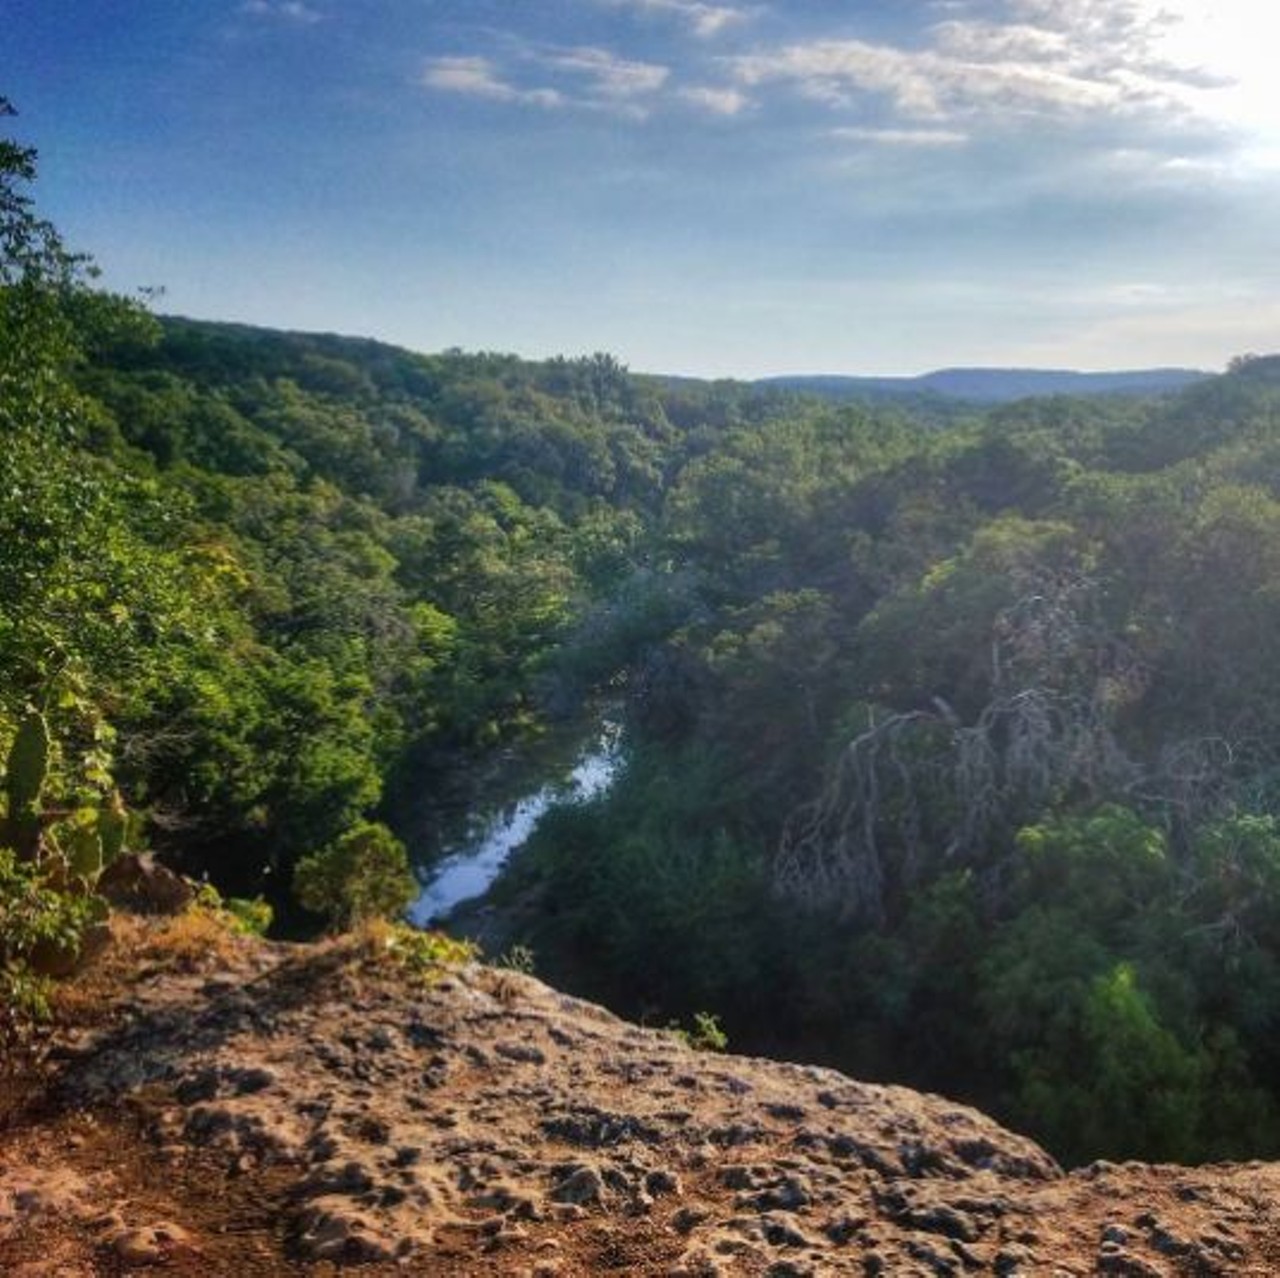 Canyon State Natural Areas
12861 Galm Road, (210) 688-9055 
Have a kiss to remember at the picturesque hillsides of Canyon State Natural Areas. 
Photo via Instagram, joesulak